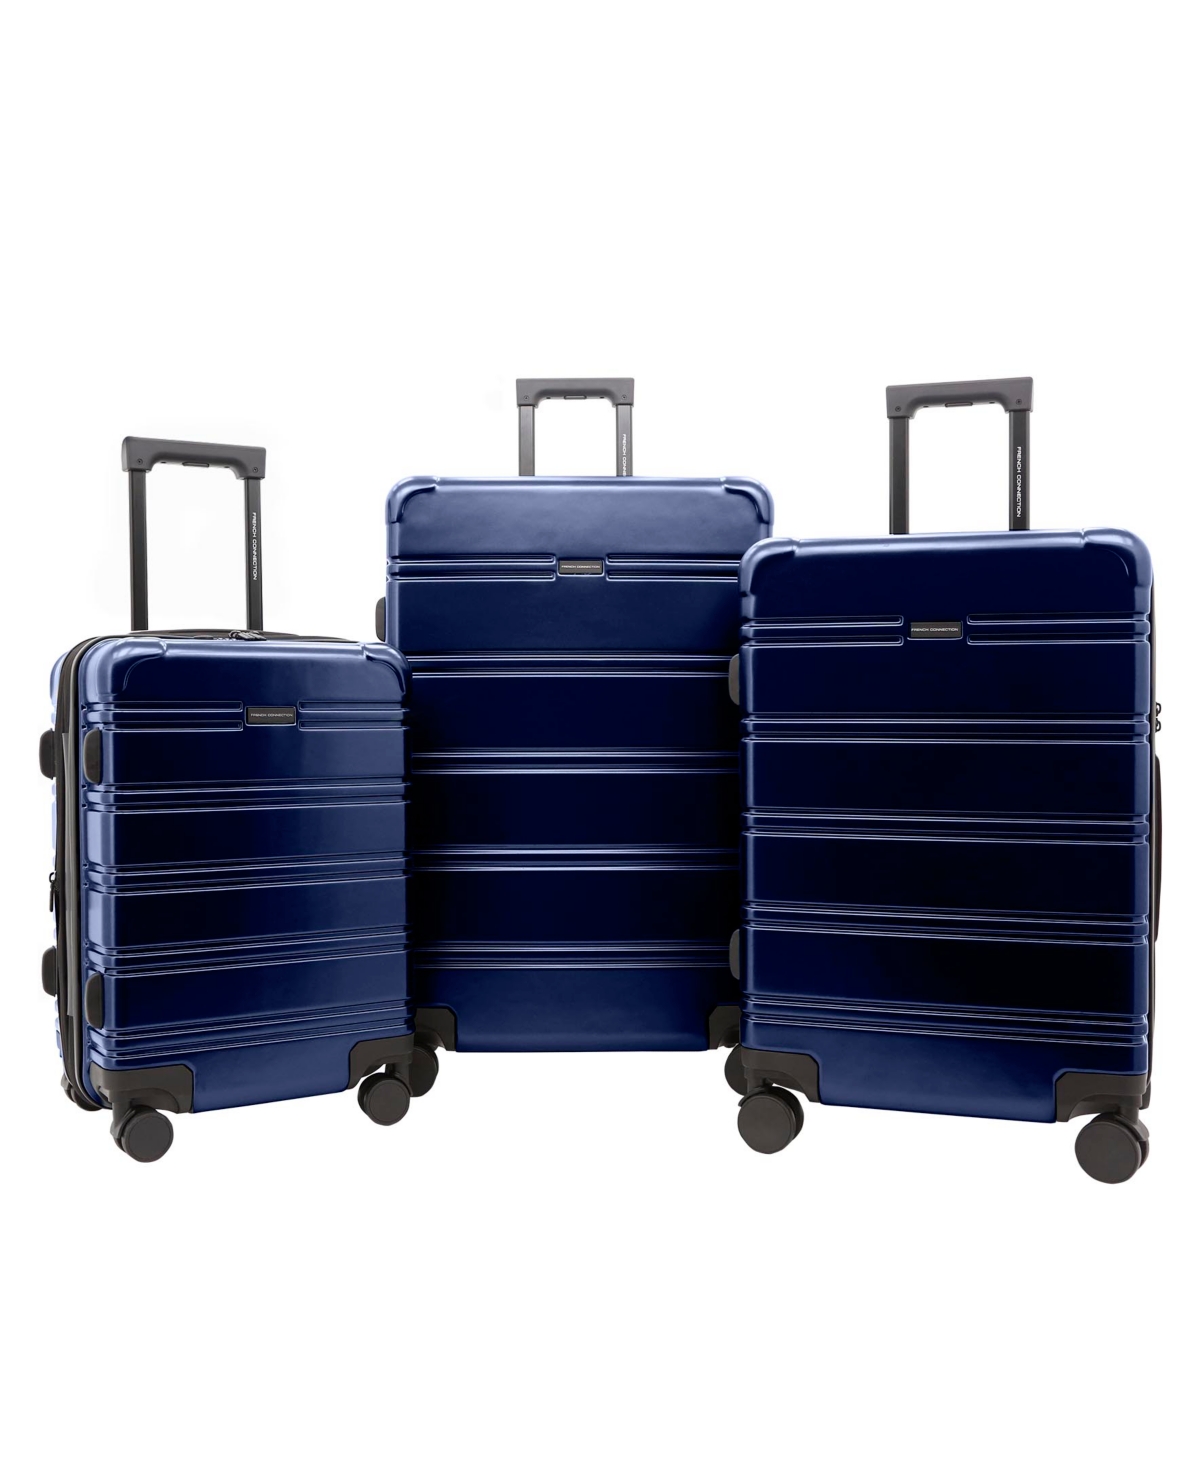 French Connection Conrad Expandable Rolling Hardside Luggage Set, 3 Piece In Navy